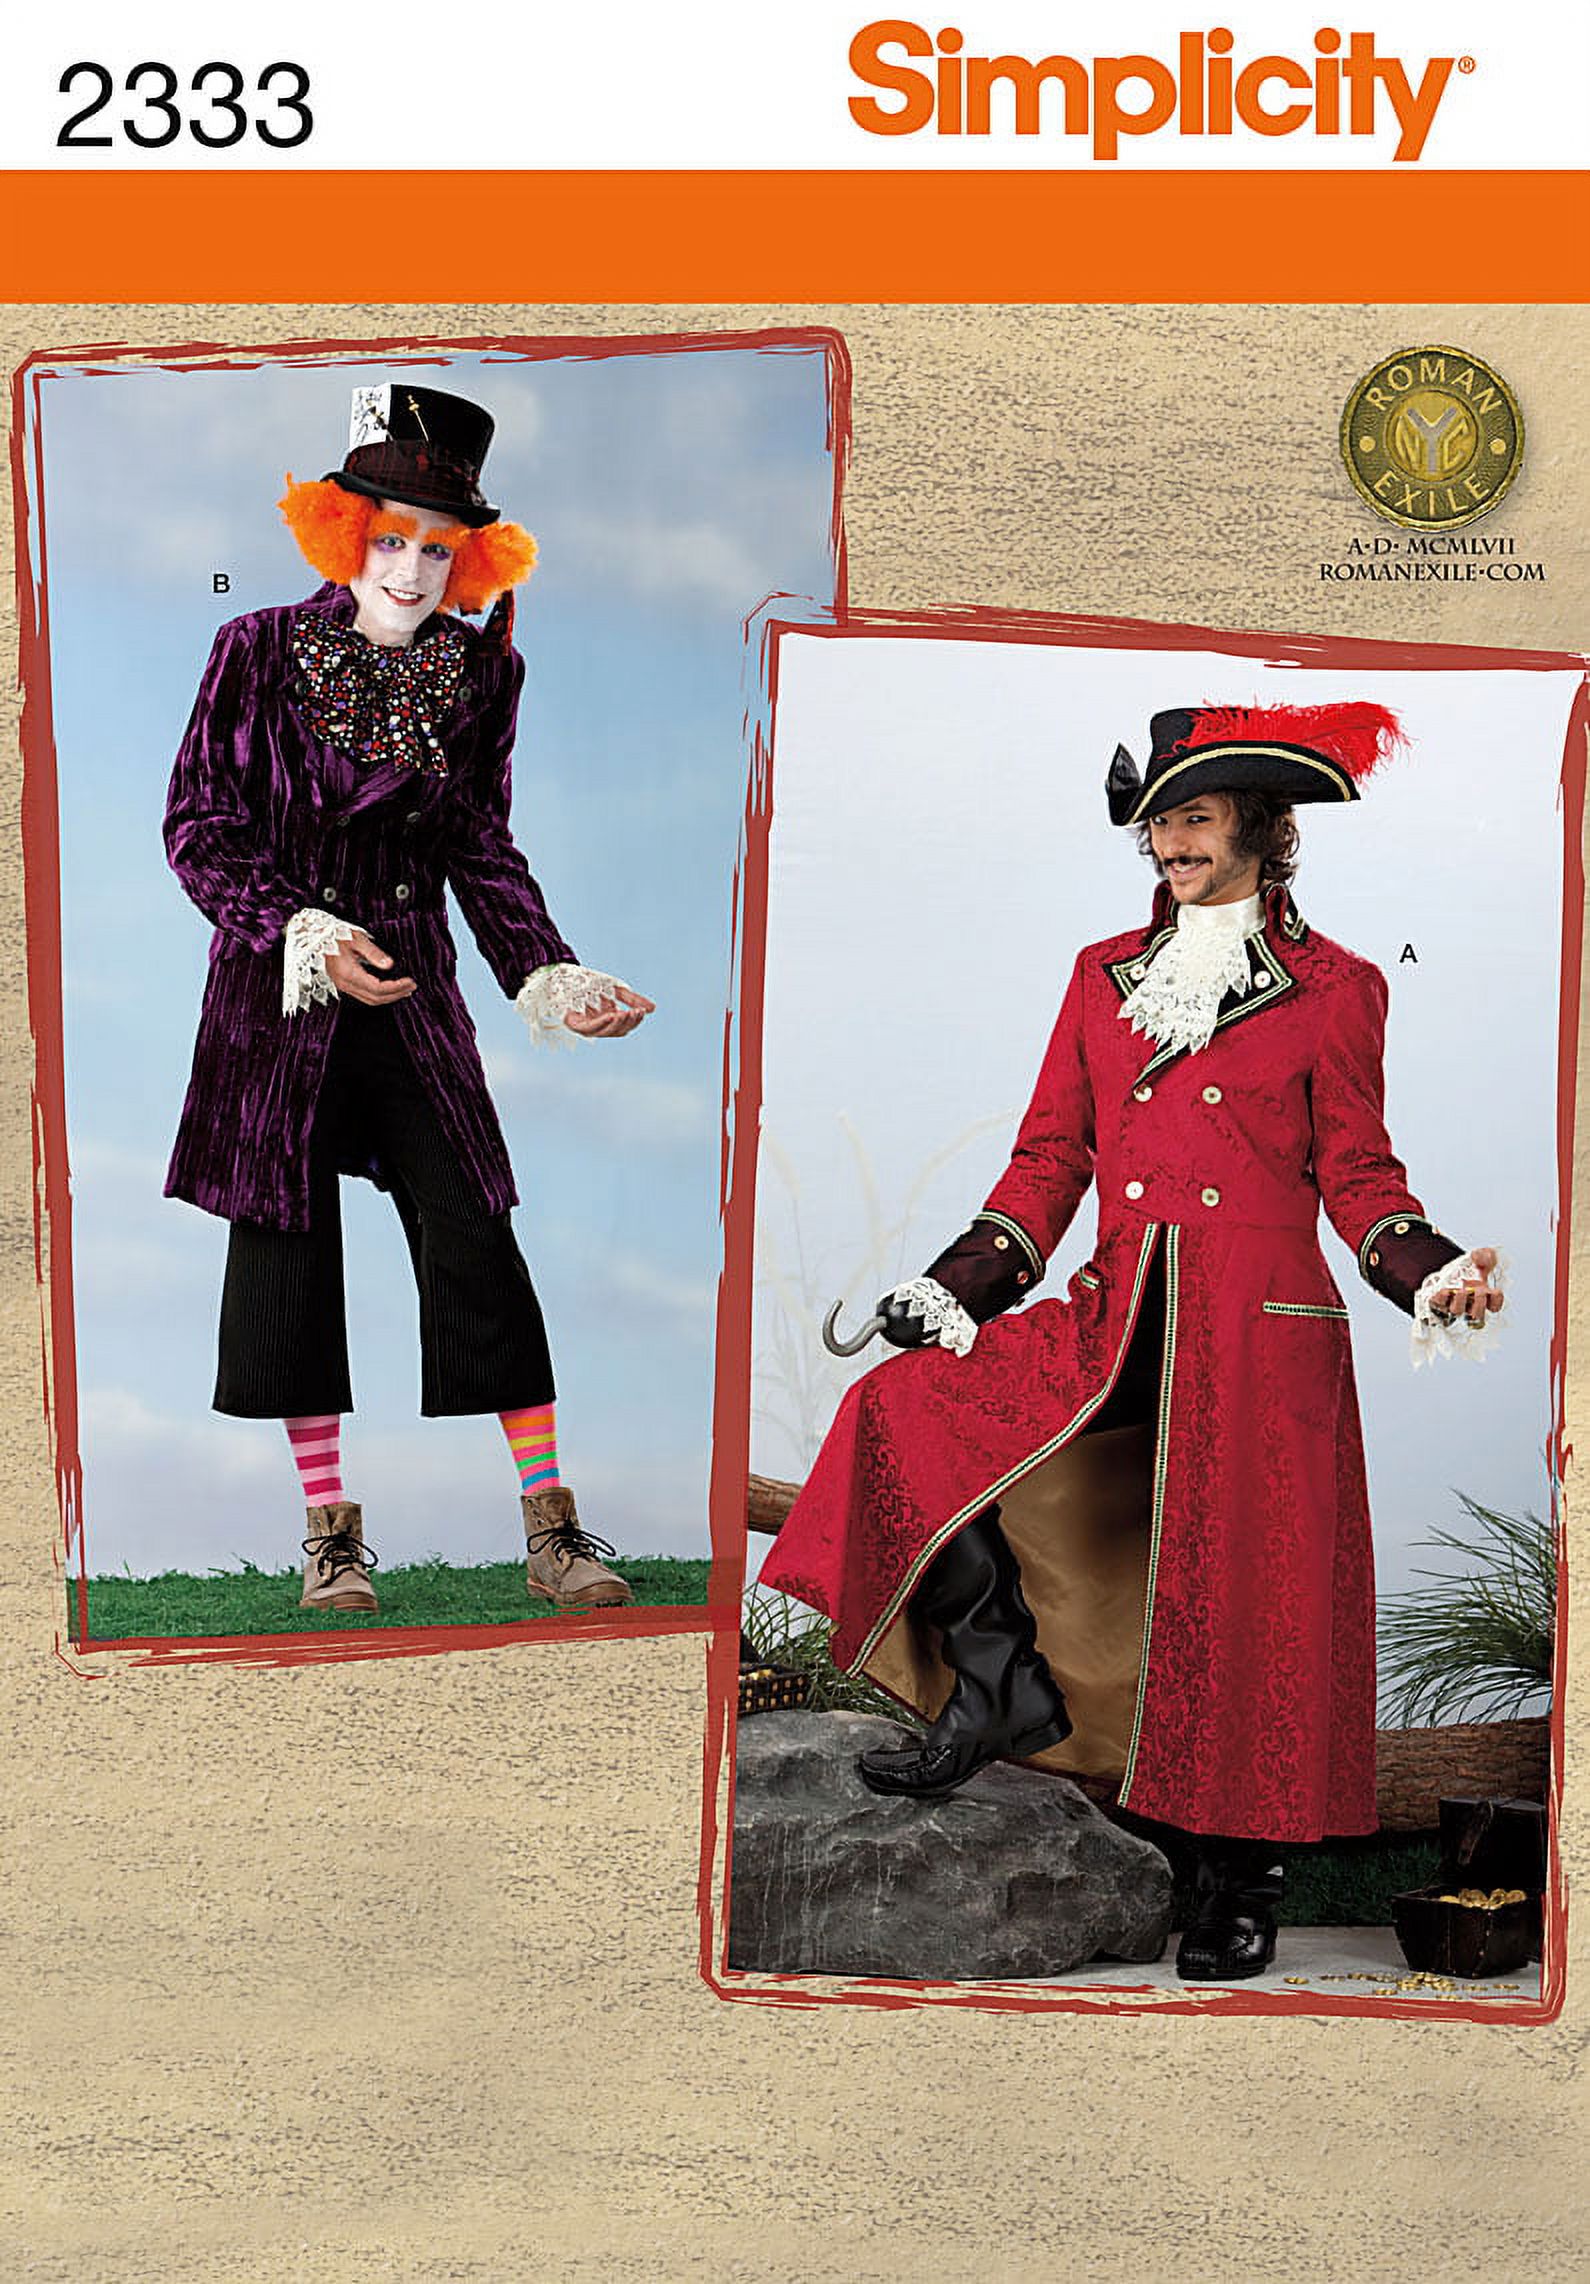 Simplicity Size S-M Mad Hatter, Roman Exile & Ship's Captain Costumes Pattern, 1 Each - image 2 of 2